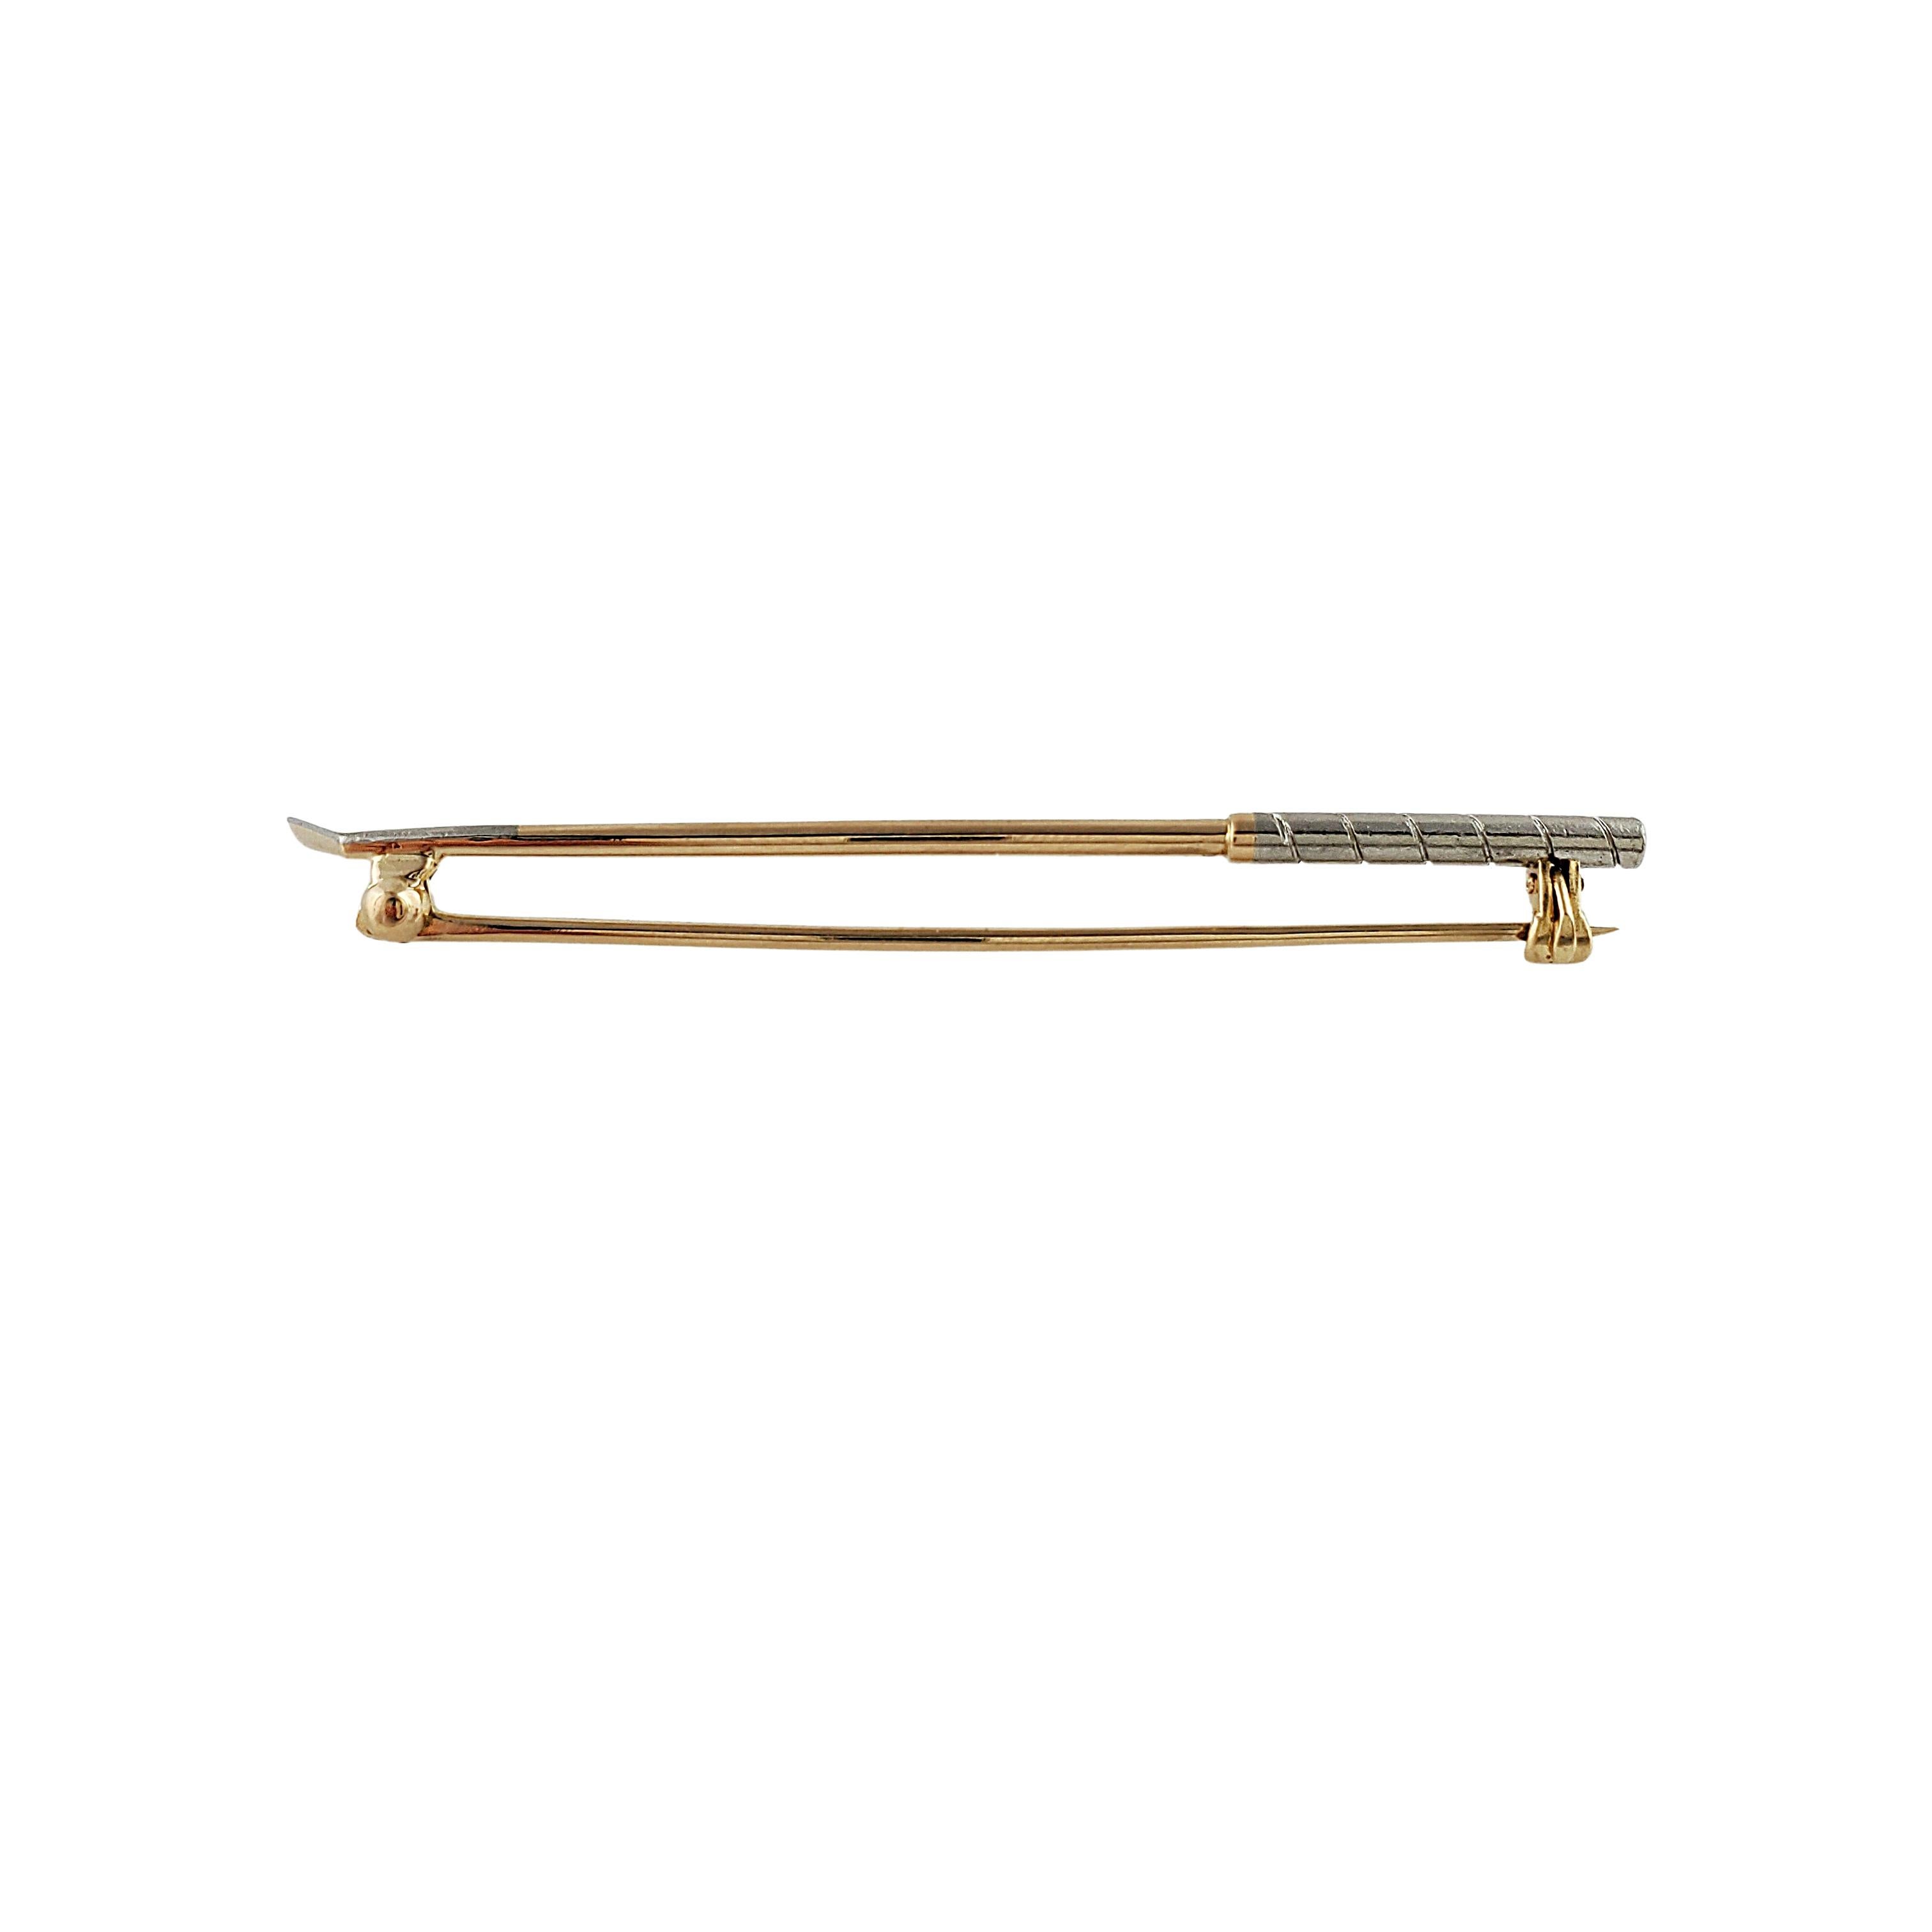 Vintage 14K White & Yellow Gold Golf Club Pin

Take a swing with this pin!! This golf club pin is a mixture of 14k white and yellow gold and is also a good representation of a real golf club. The pin part is the length of the golf club which will